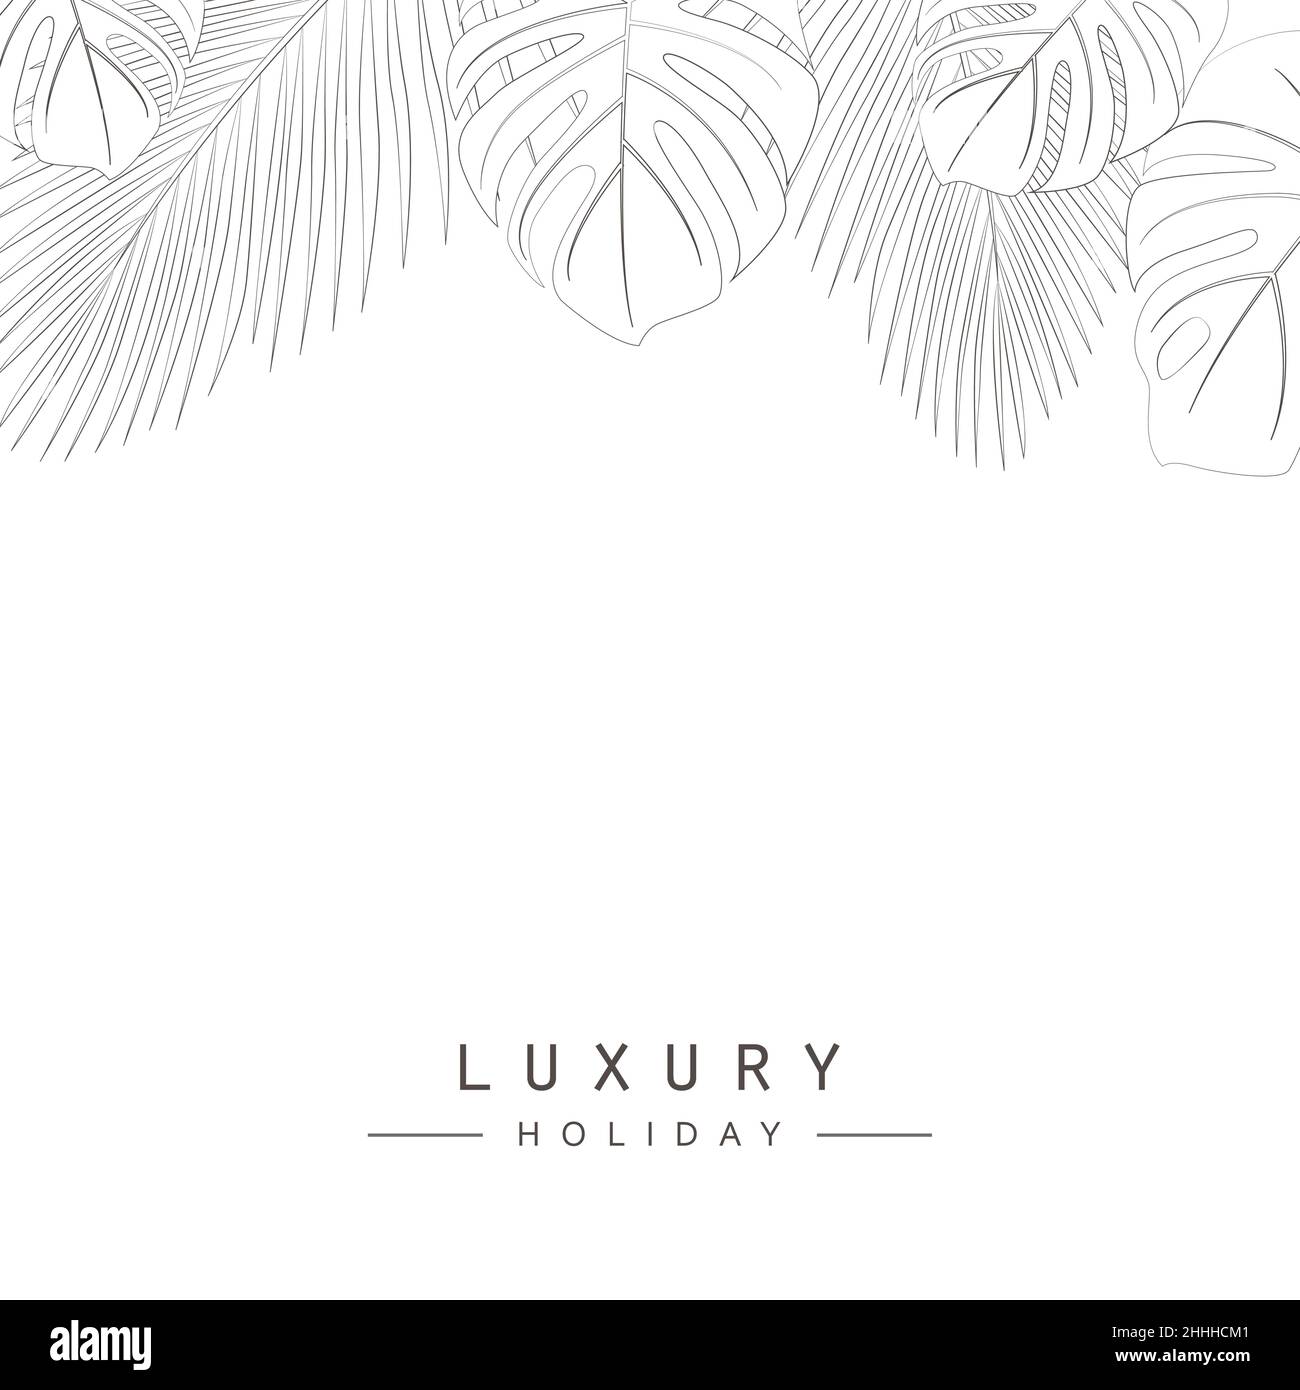 luxury holiday banner template with palm tree leaves Stock Vector